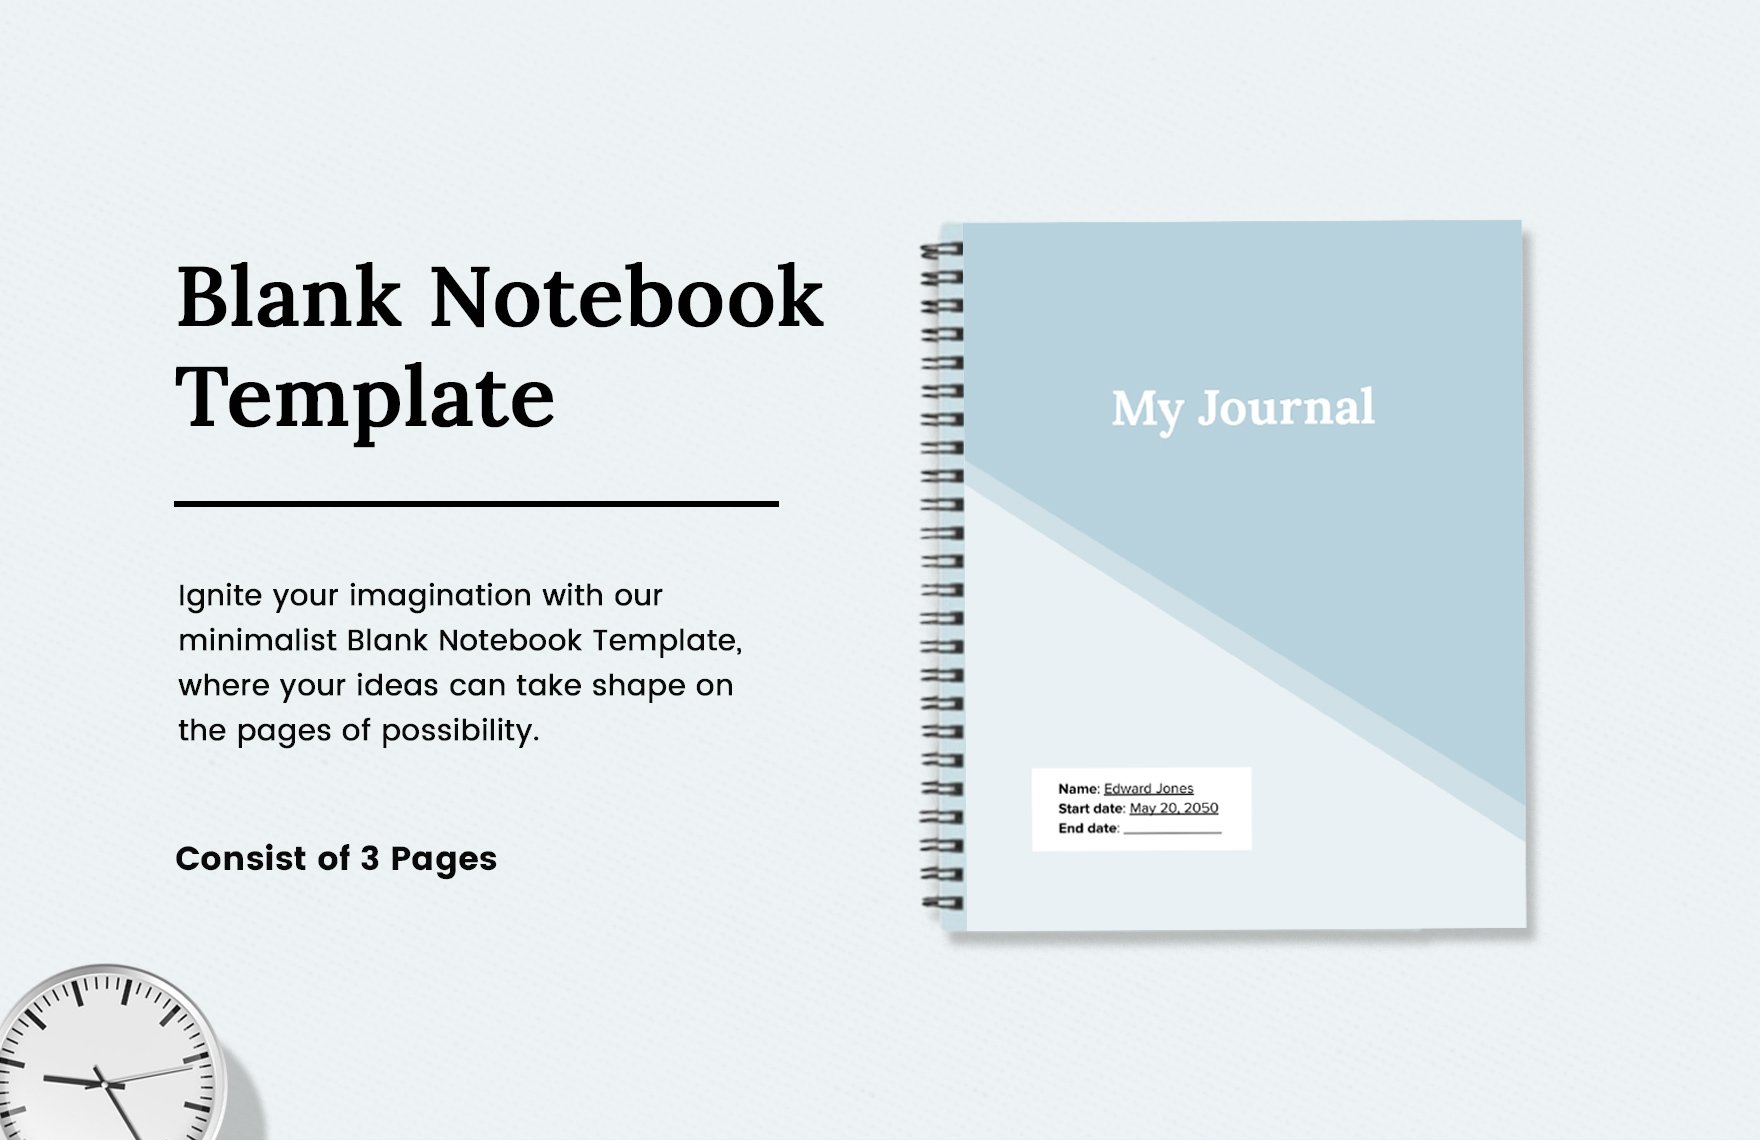 Free Blank Notebook Template in Word, Google Docs, PDF